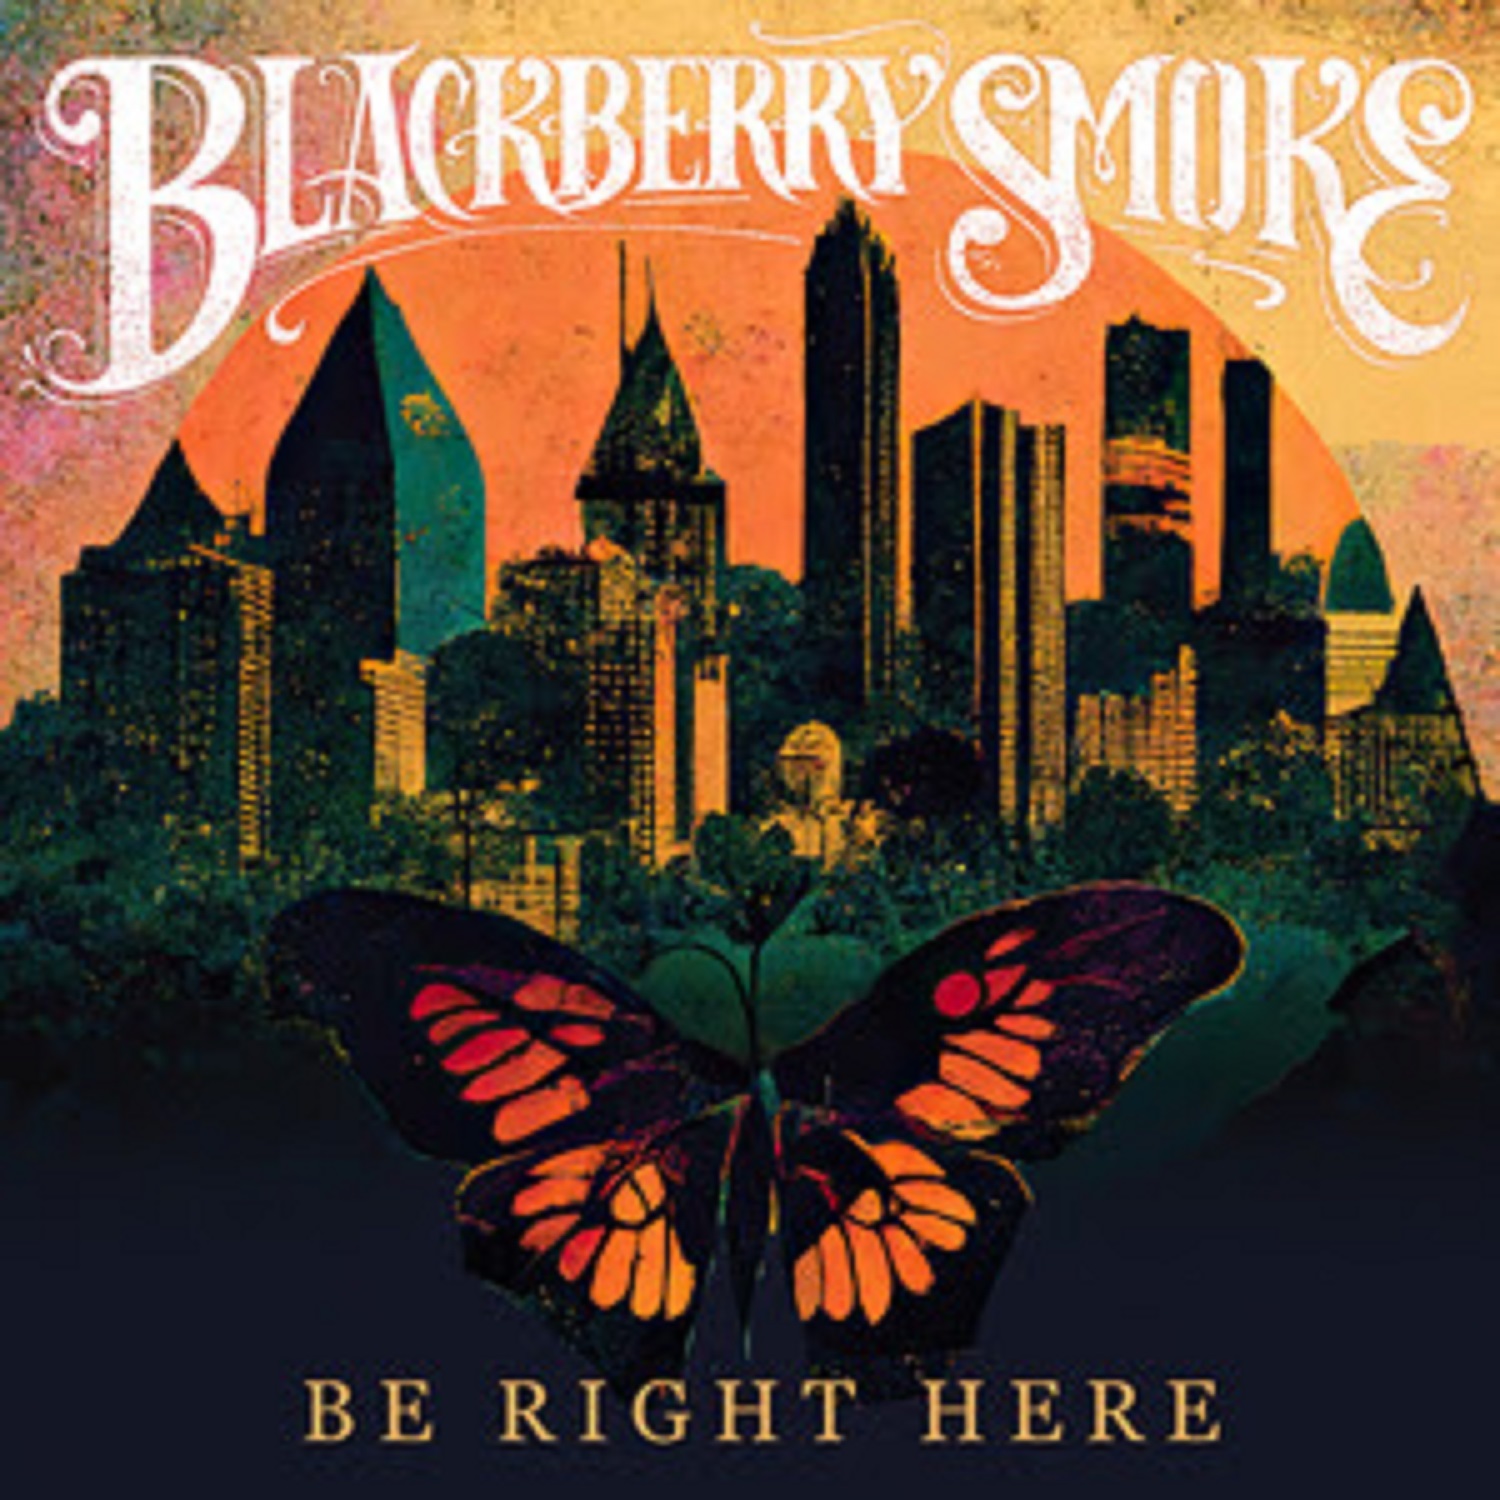 Blackberry Smoke's new album "Be Right Here" out today